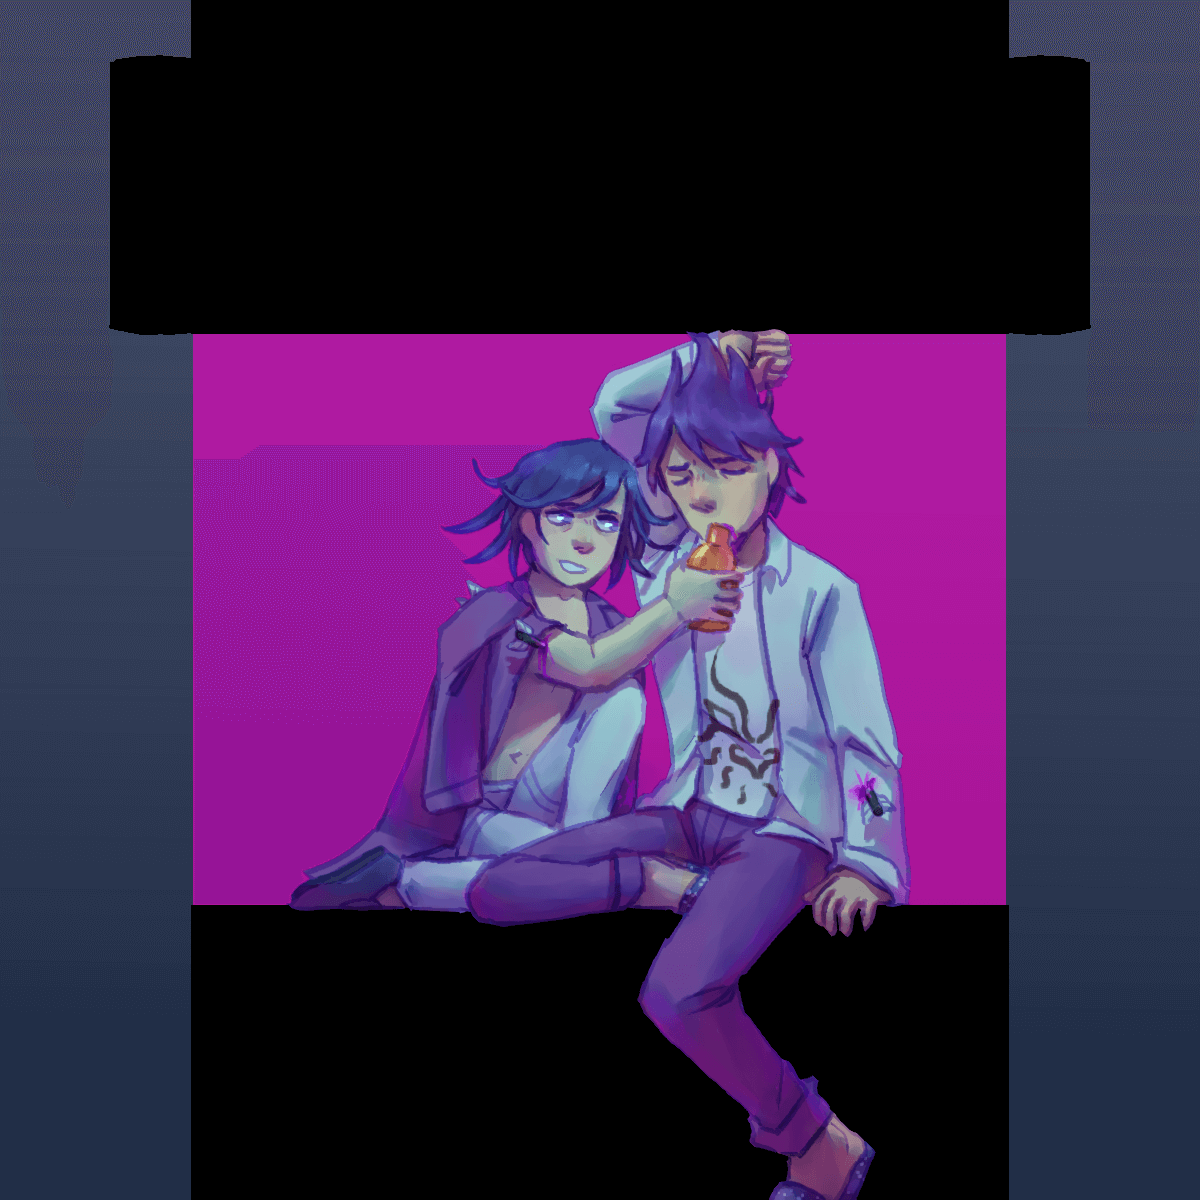 a drawing of kokichi and kaito sitting on a silhouette of the press. kaito is 
		holding up the top of the press with his arm. kokichi is wearing kaito's jacket and giving him the antidote.